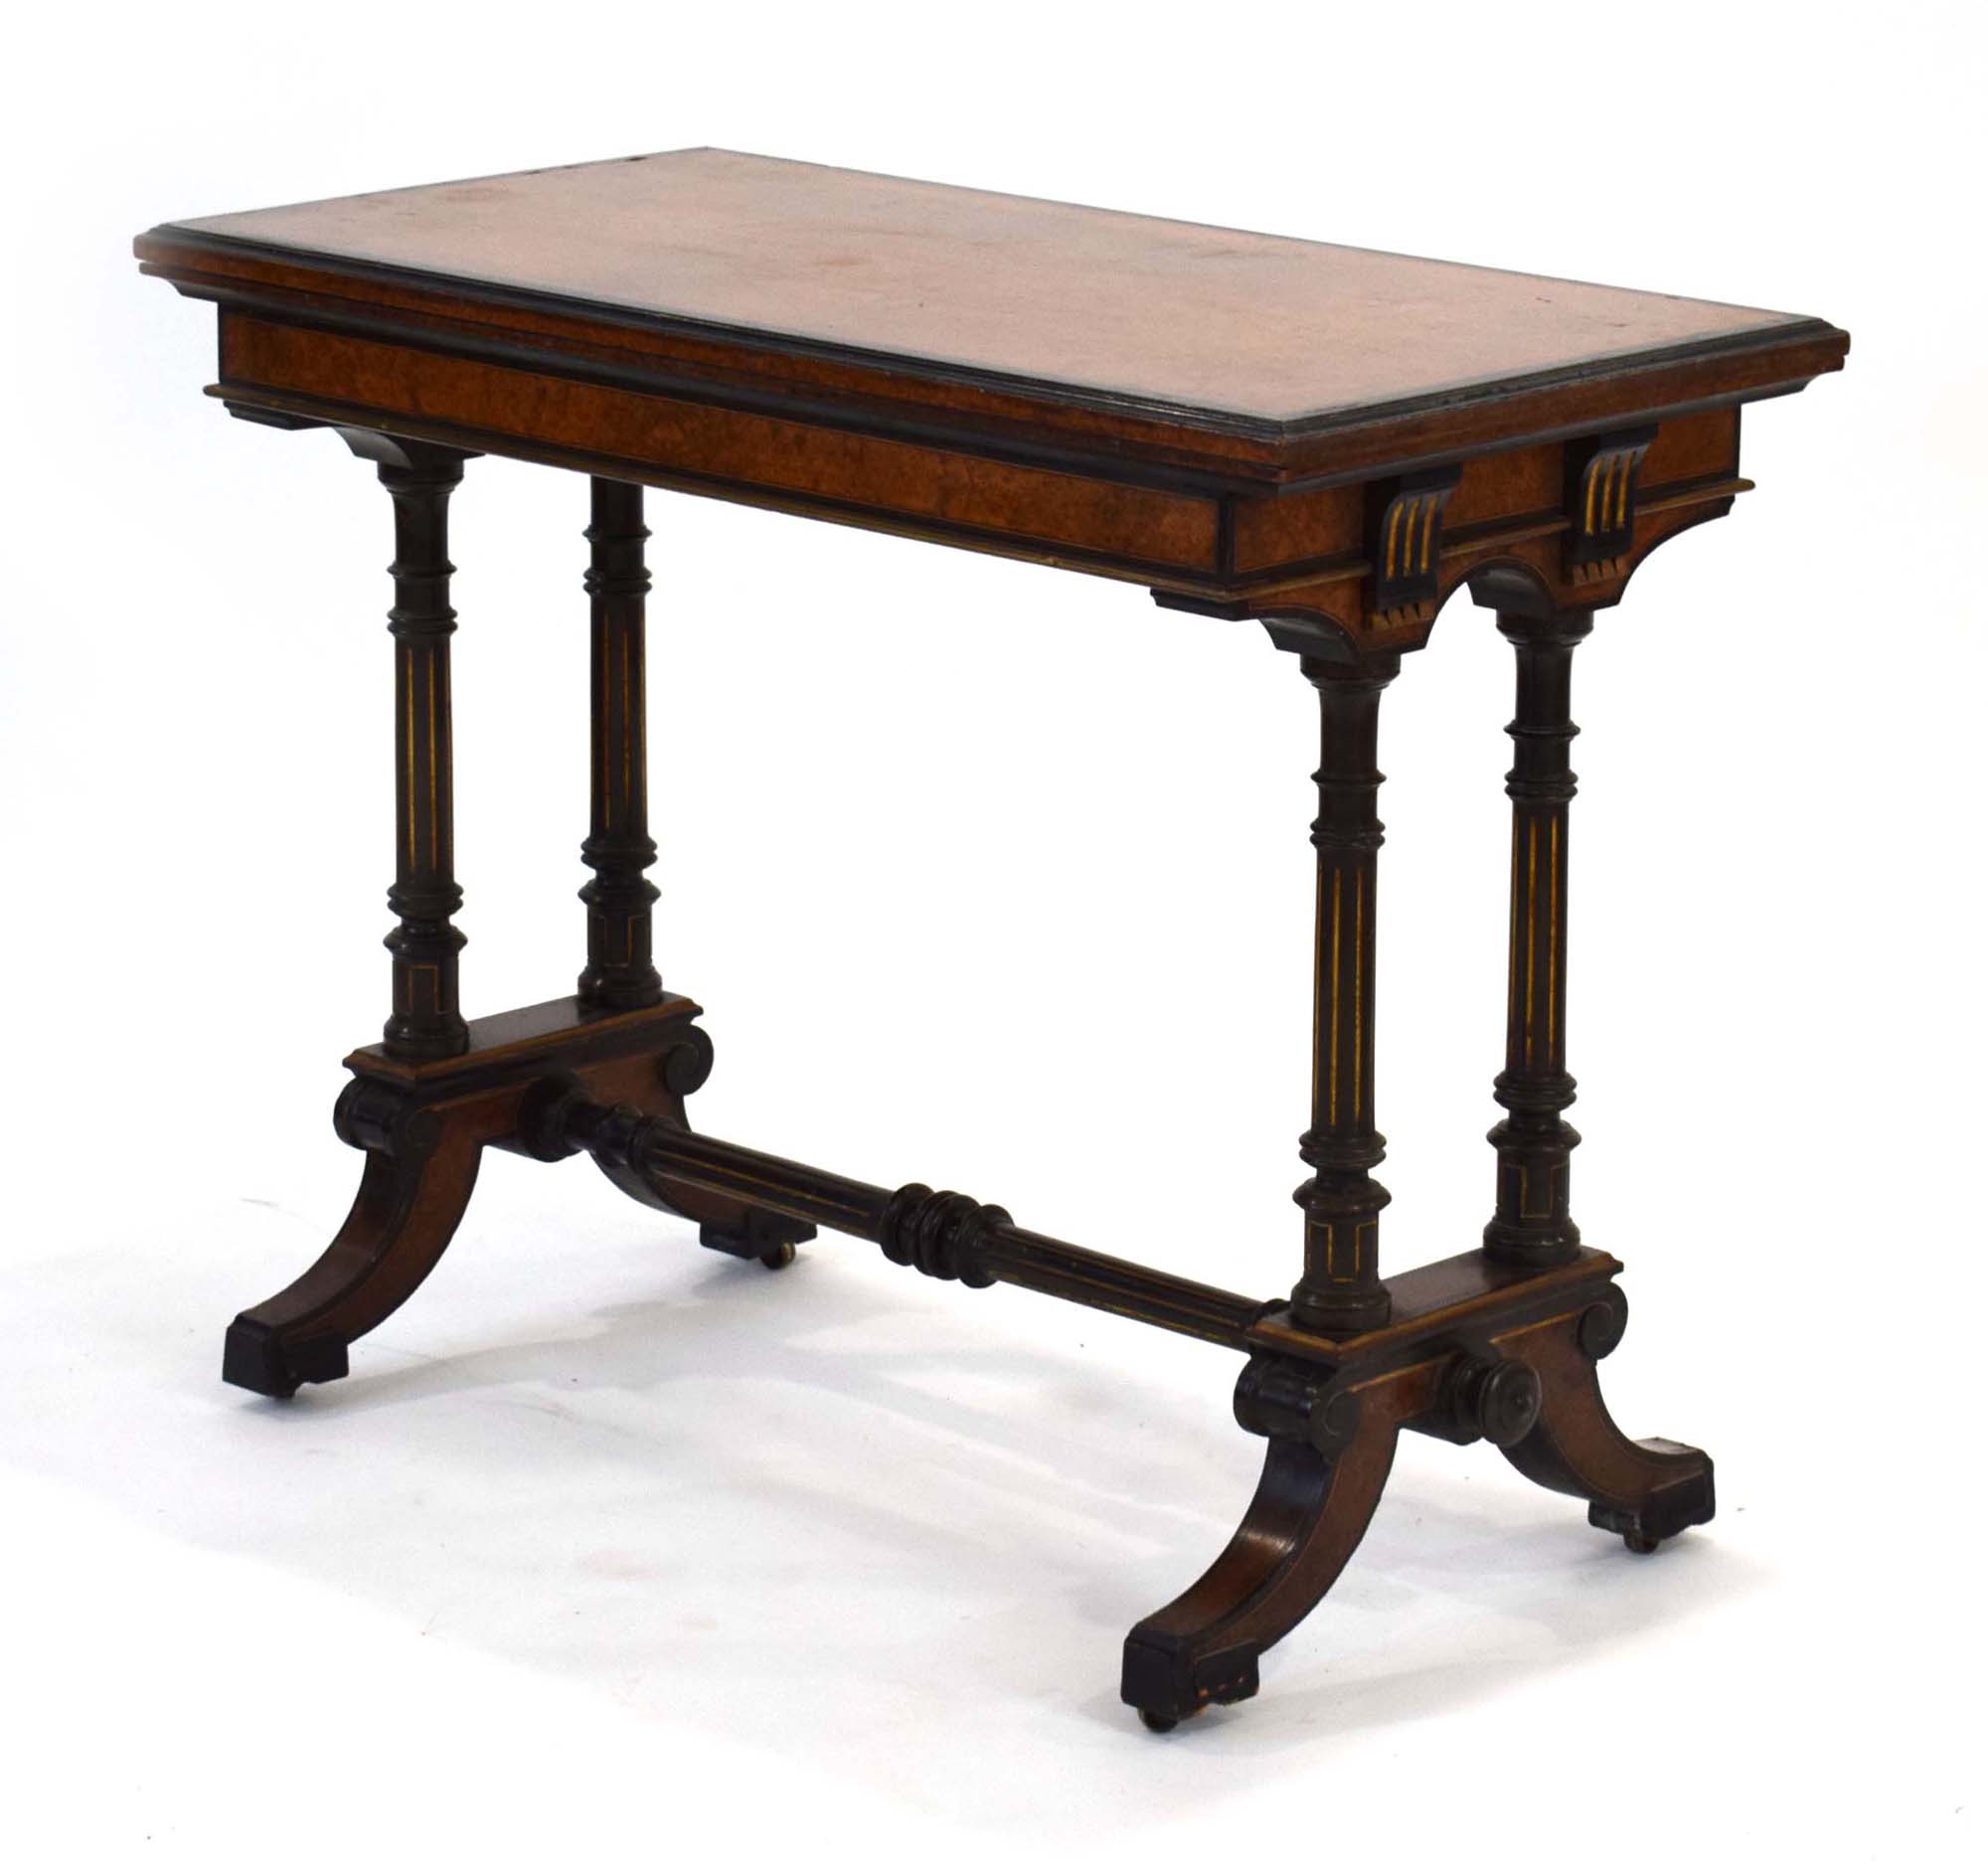 A Gillows side table, the walnut and ebonised top folding to reveal a baize covered games surface,